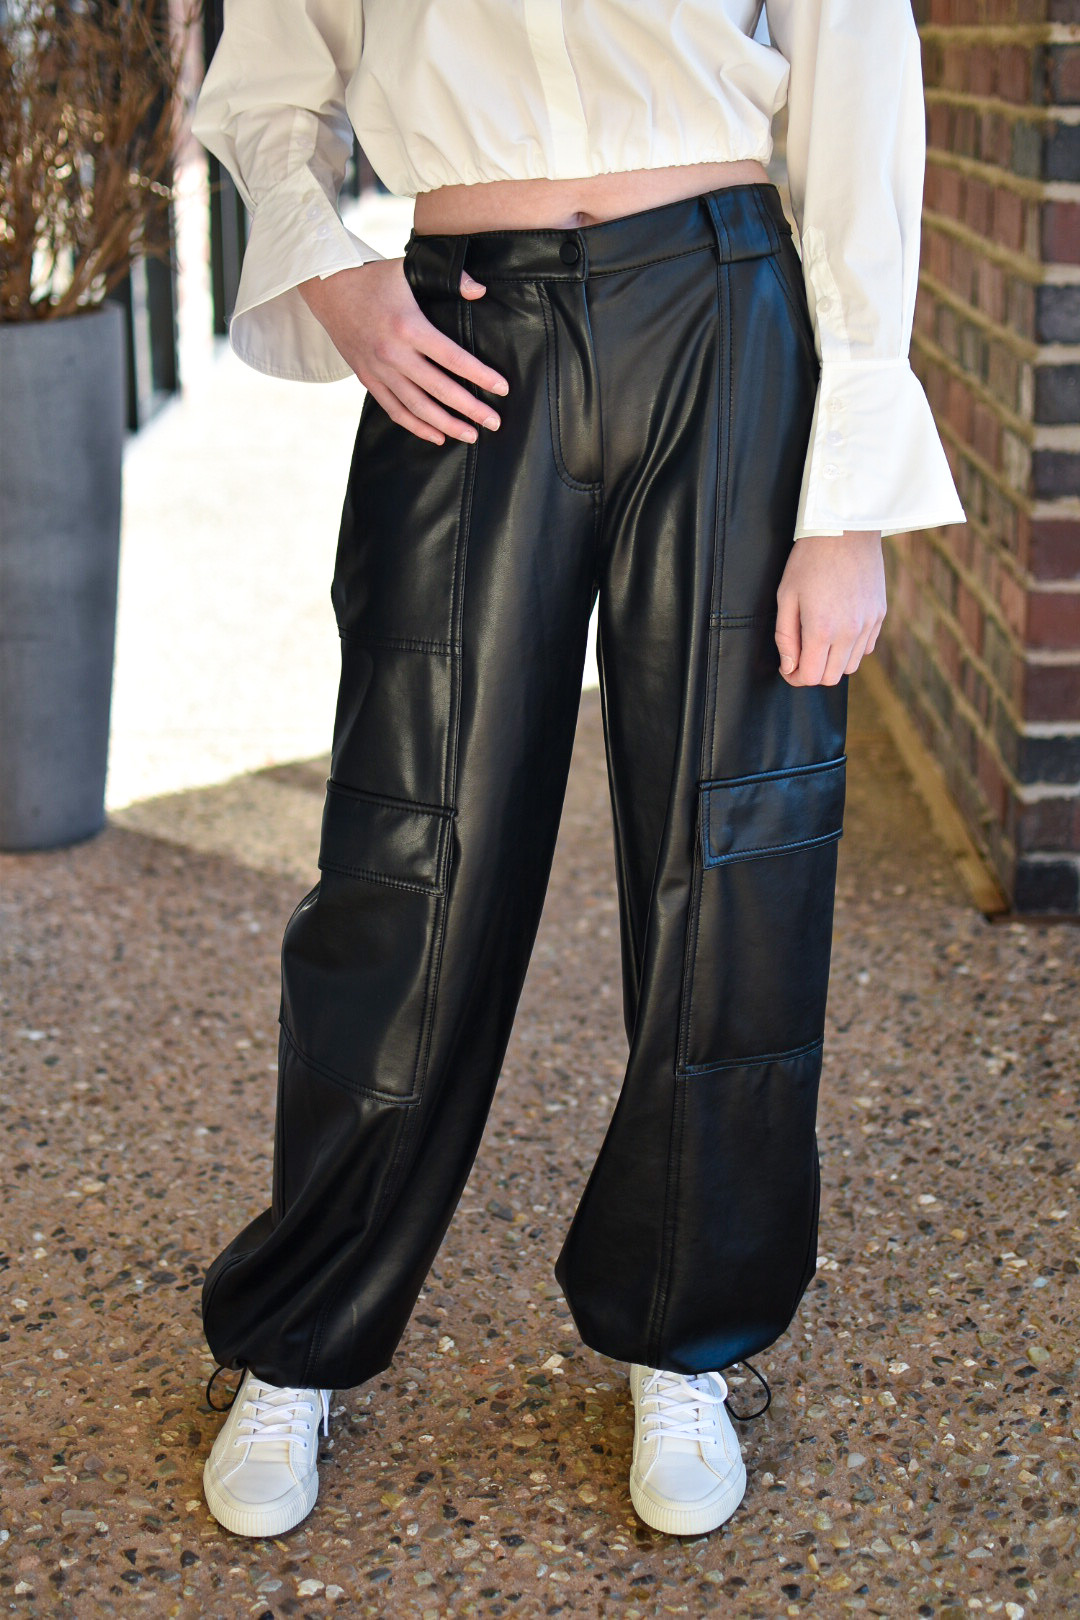 Styling Vegan Leather Pants  LivingLesh - a luxe lifestyle blog